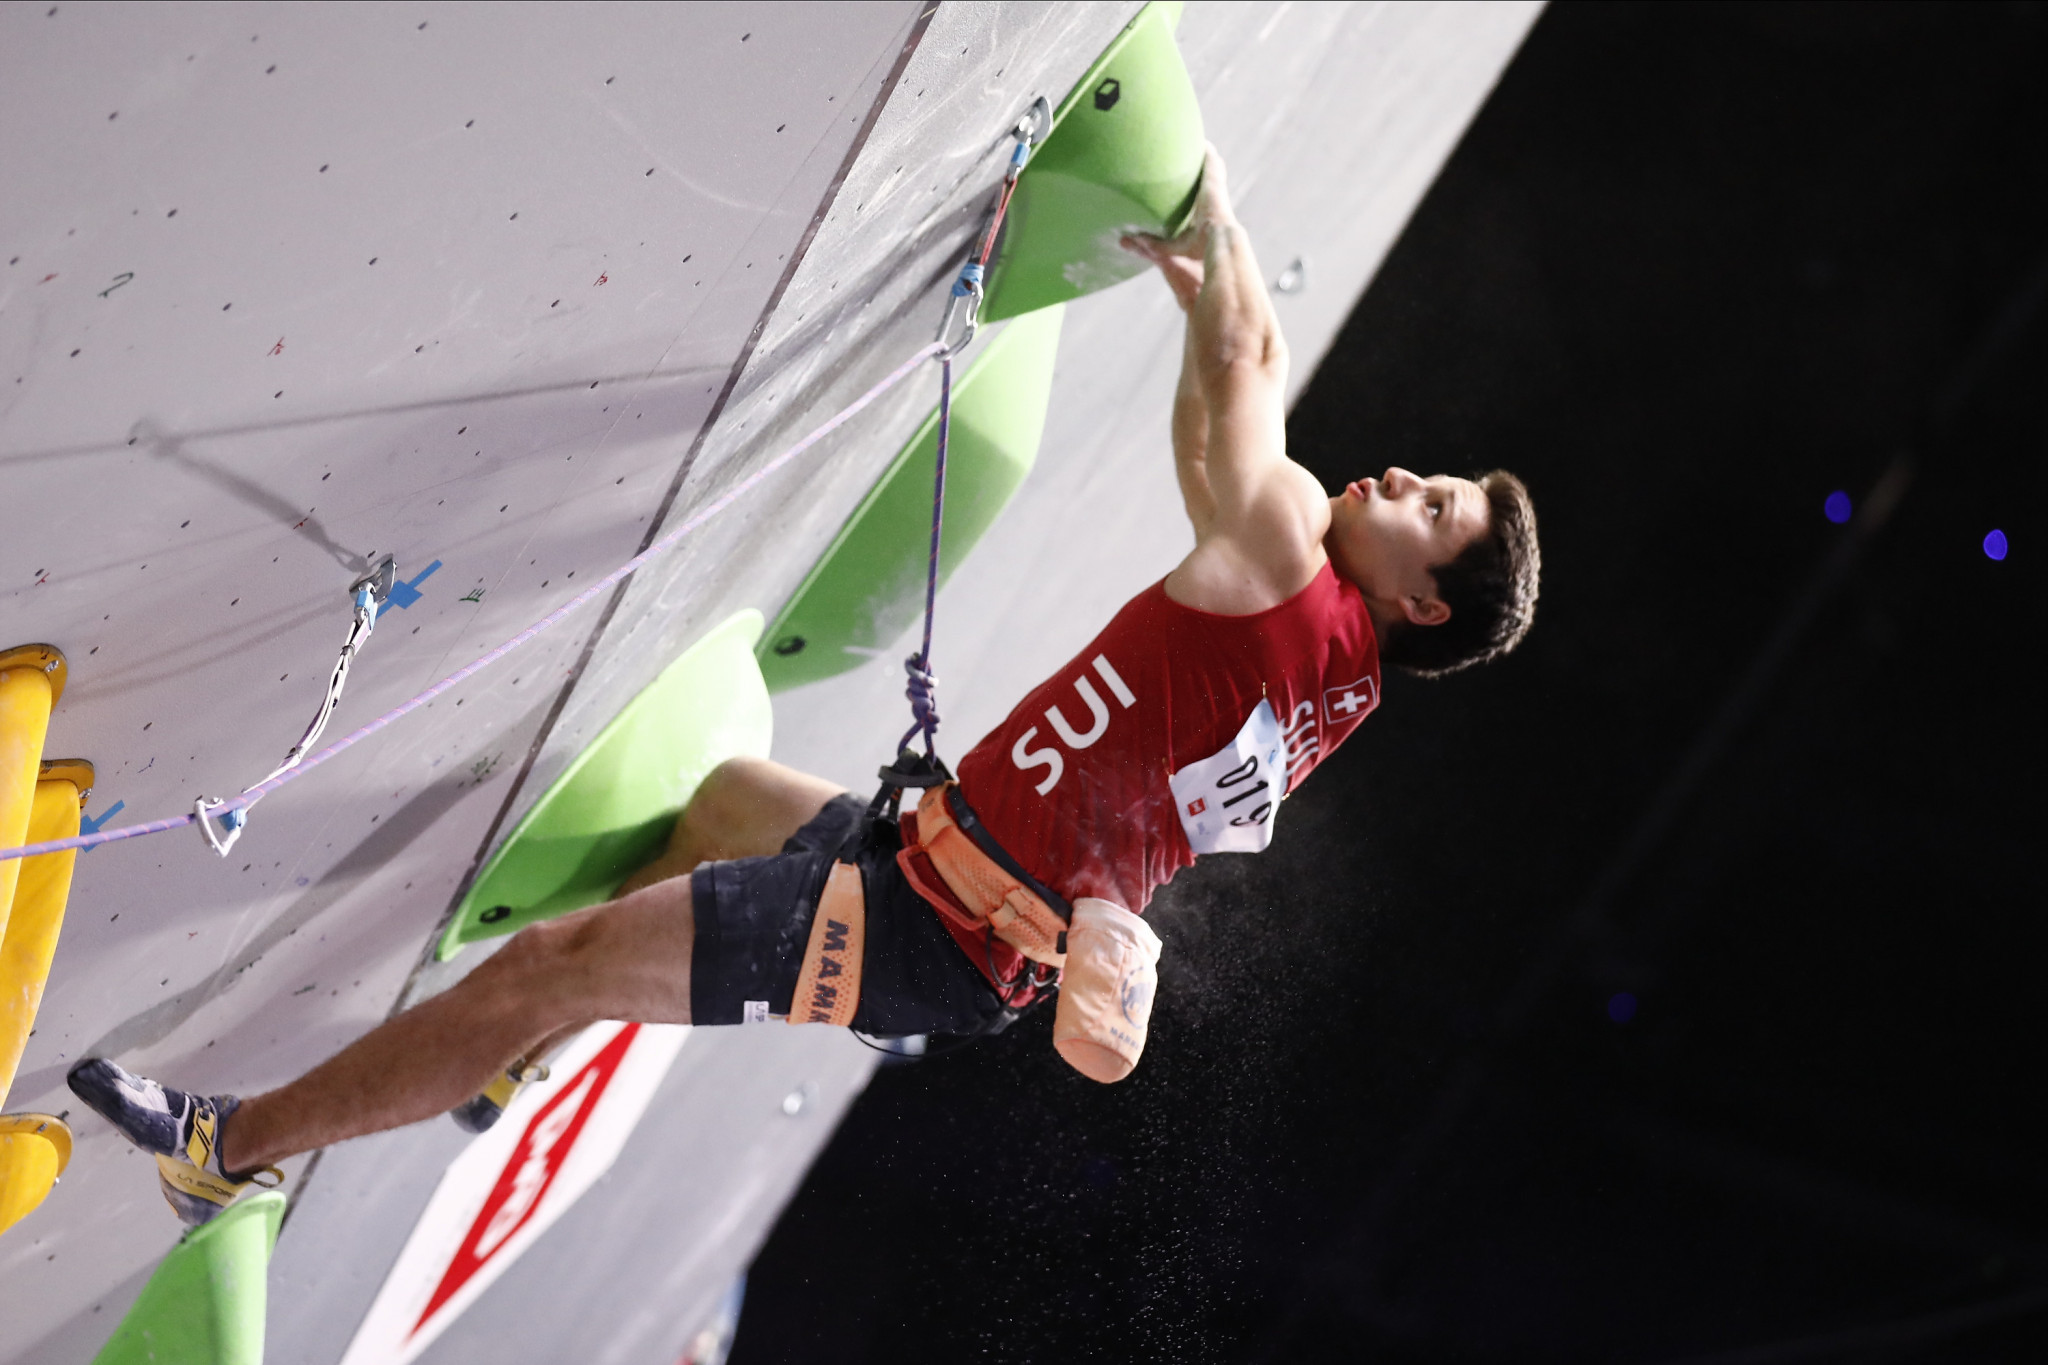 Sascha Lehmann of Switzerland topped the men's combined qualifying at the IFSC European Championships ©Getty Images